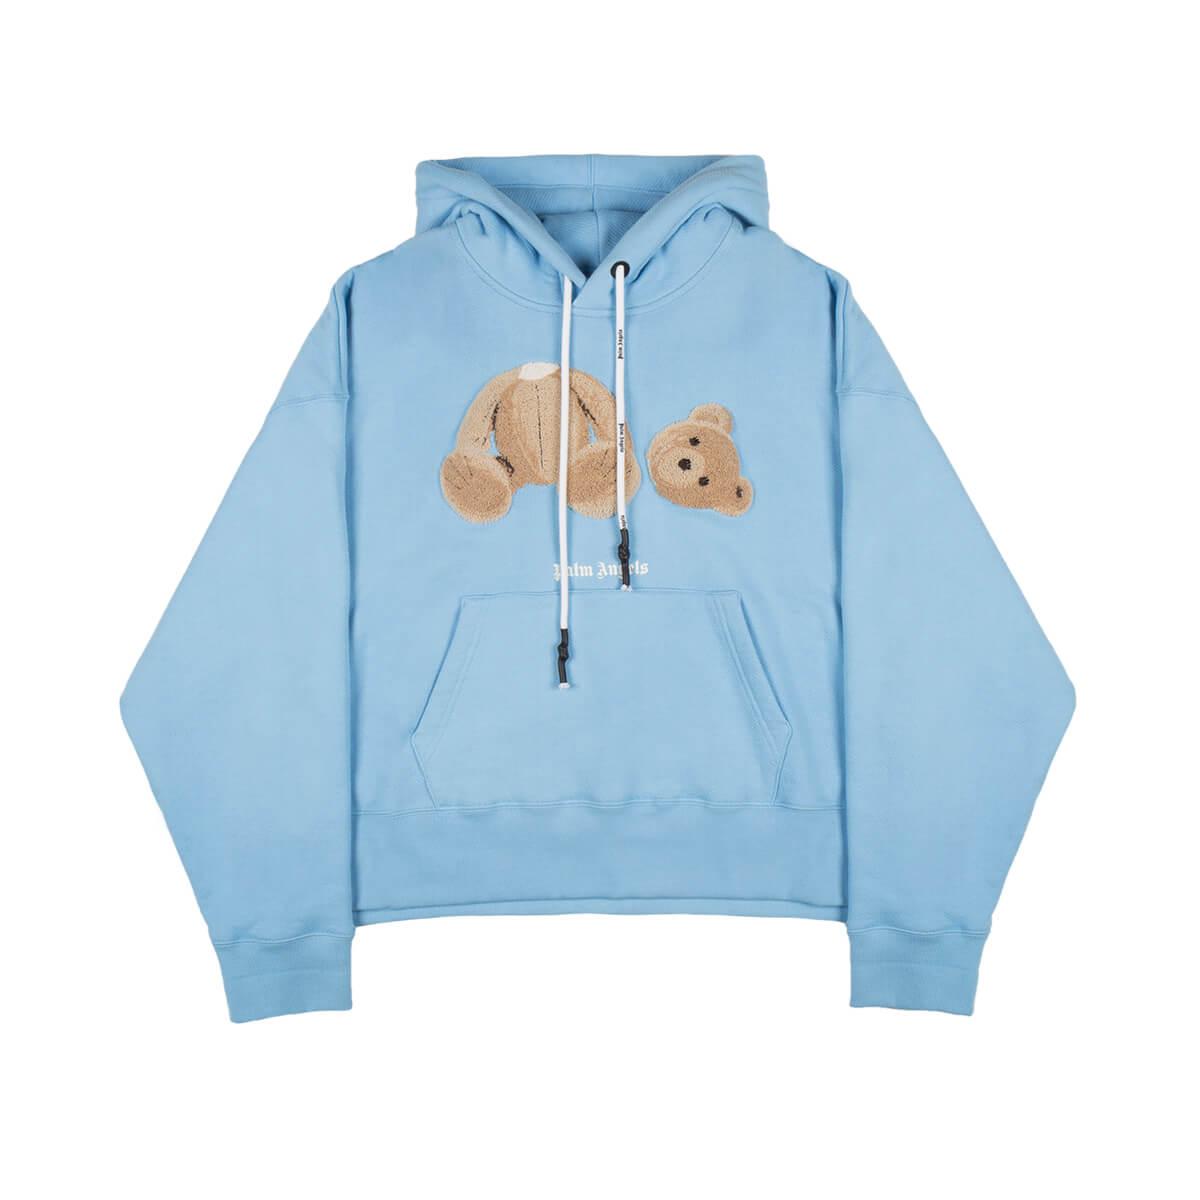 Palm Angels Cotton Ripped-teddy-bear-embroidered Hoodie in Light Blue ...